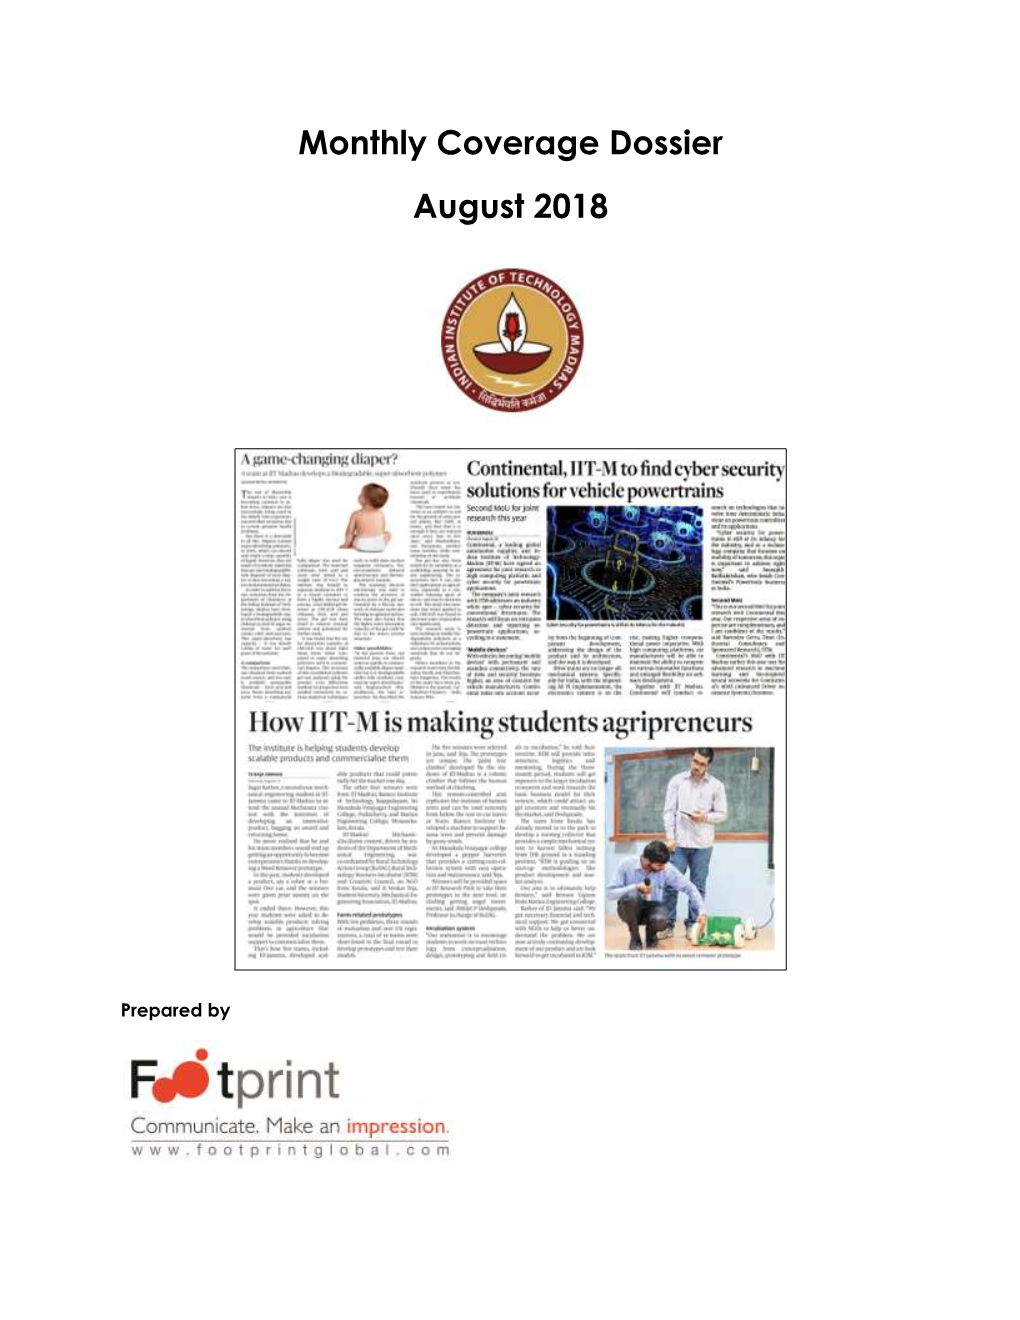 Monthly Coverage Dossier August 2018